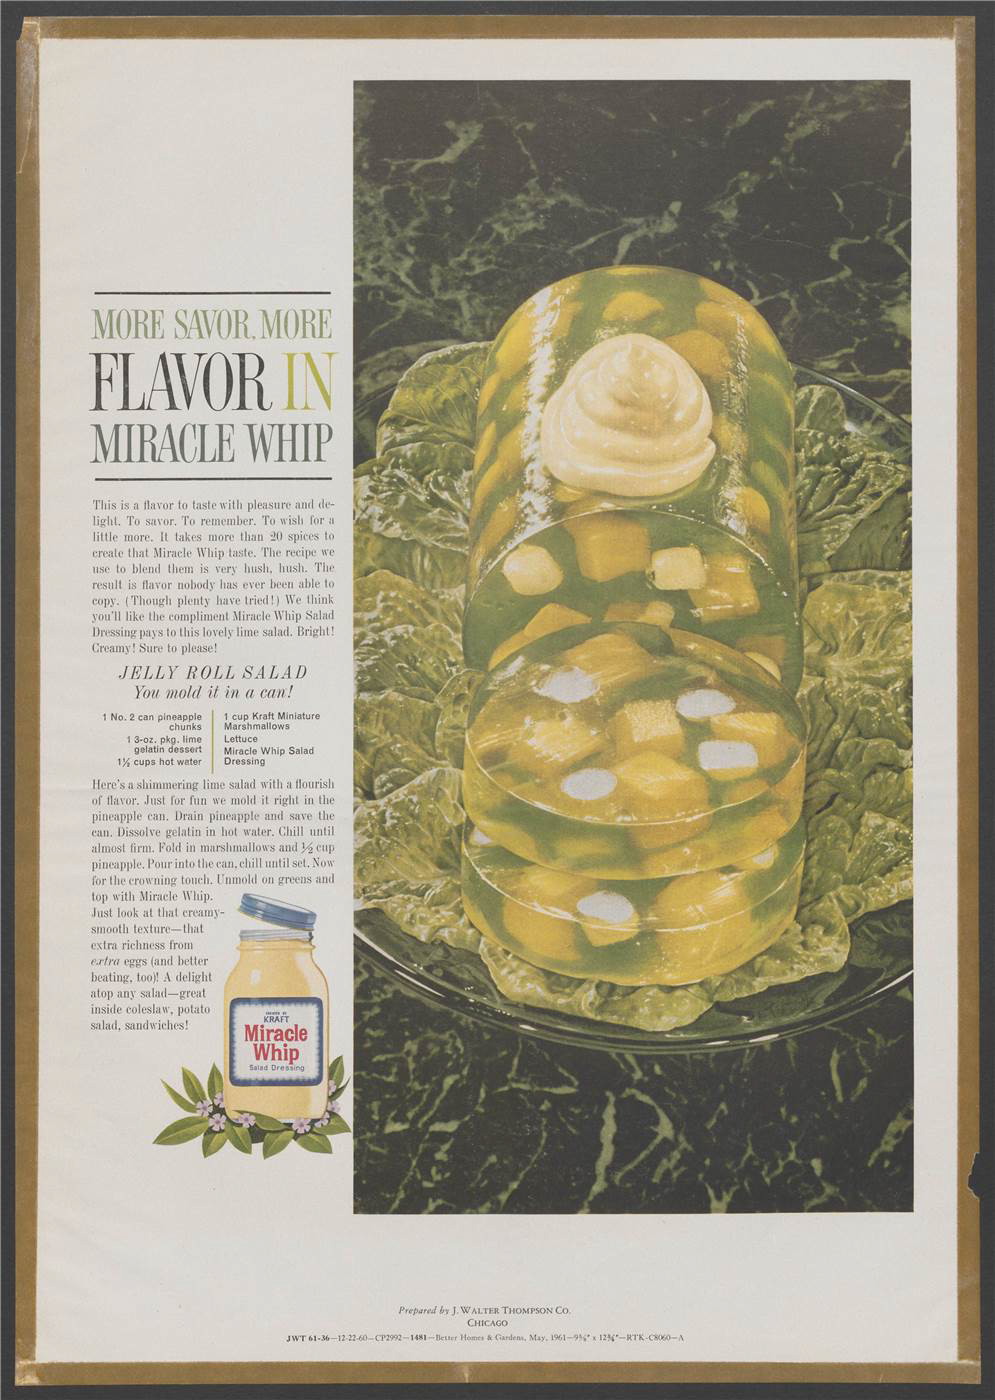 "More savor. More flavor in Miracle Whip". A cylindrical, green gelatine salad topped with Miracle Whip, sitting on a bed of lettuce, and a jar of Miracle Whip are shown. Stresses the unique taste and secret recipe of Miracle Whip. Includes a recipe for the salad